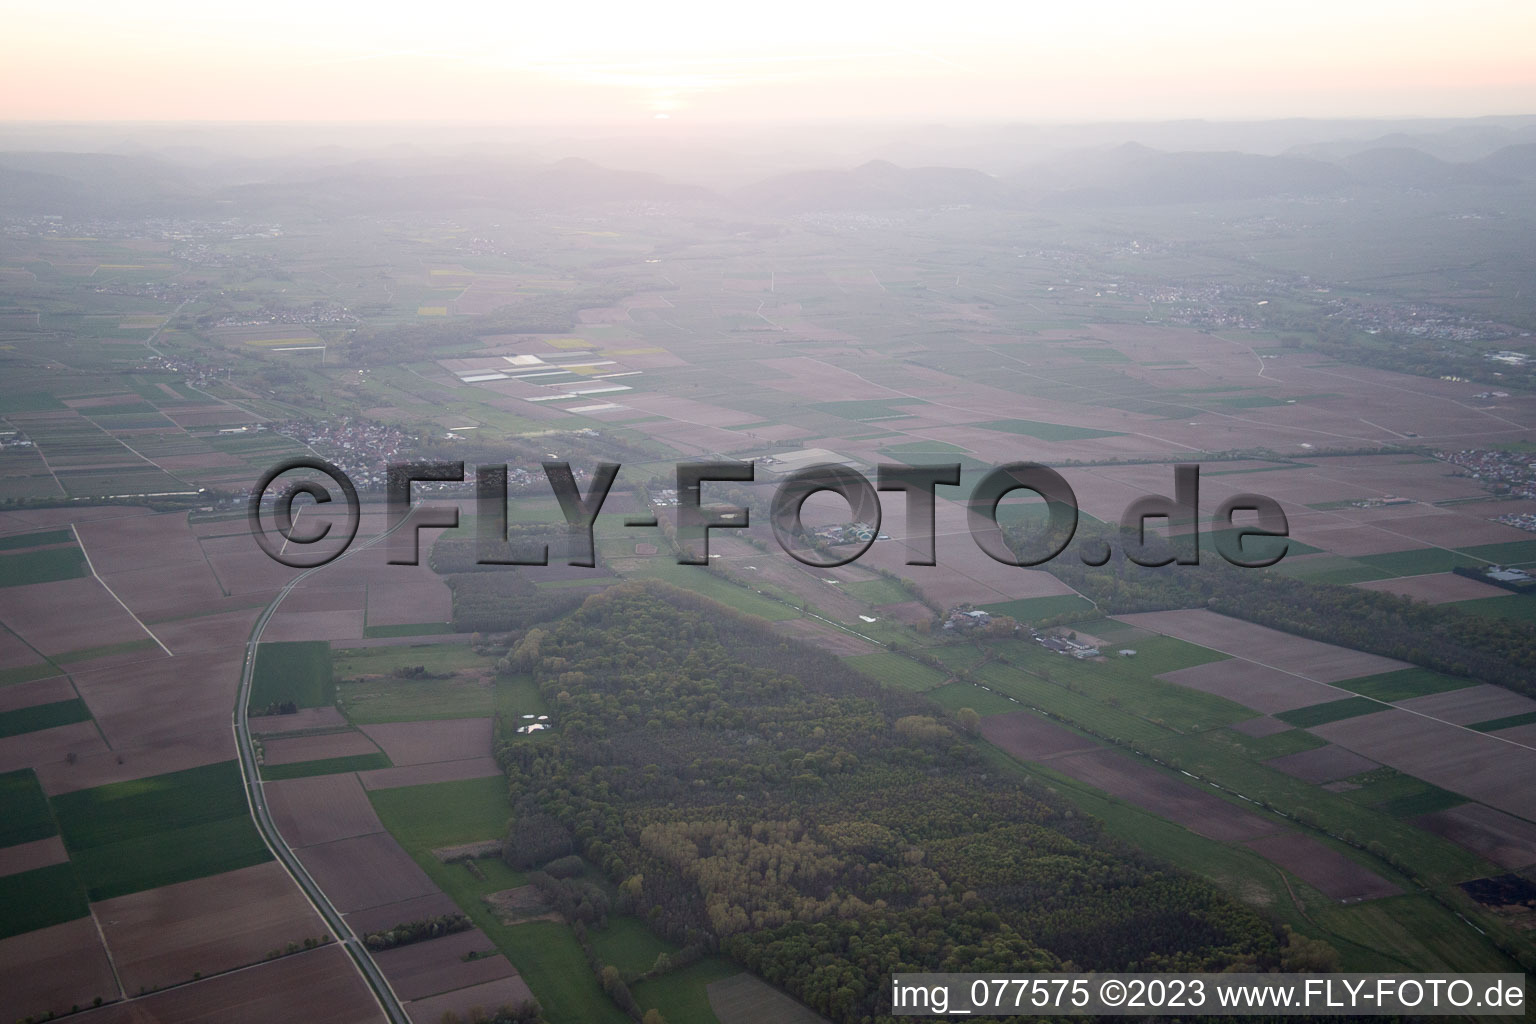 Winden in the state Rhineland-Palatinate, Germany out of the air